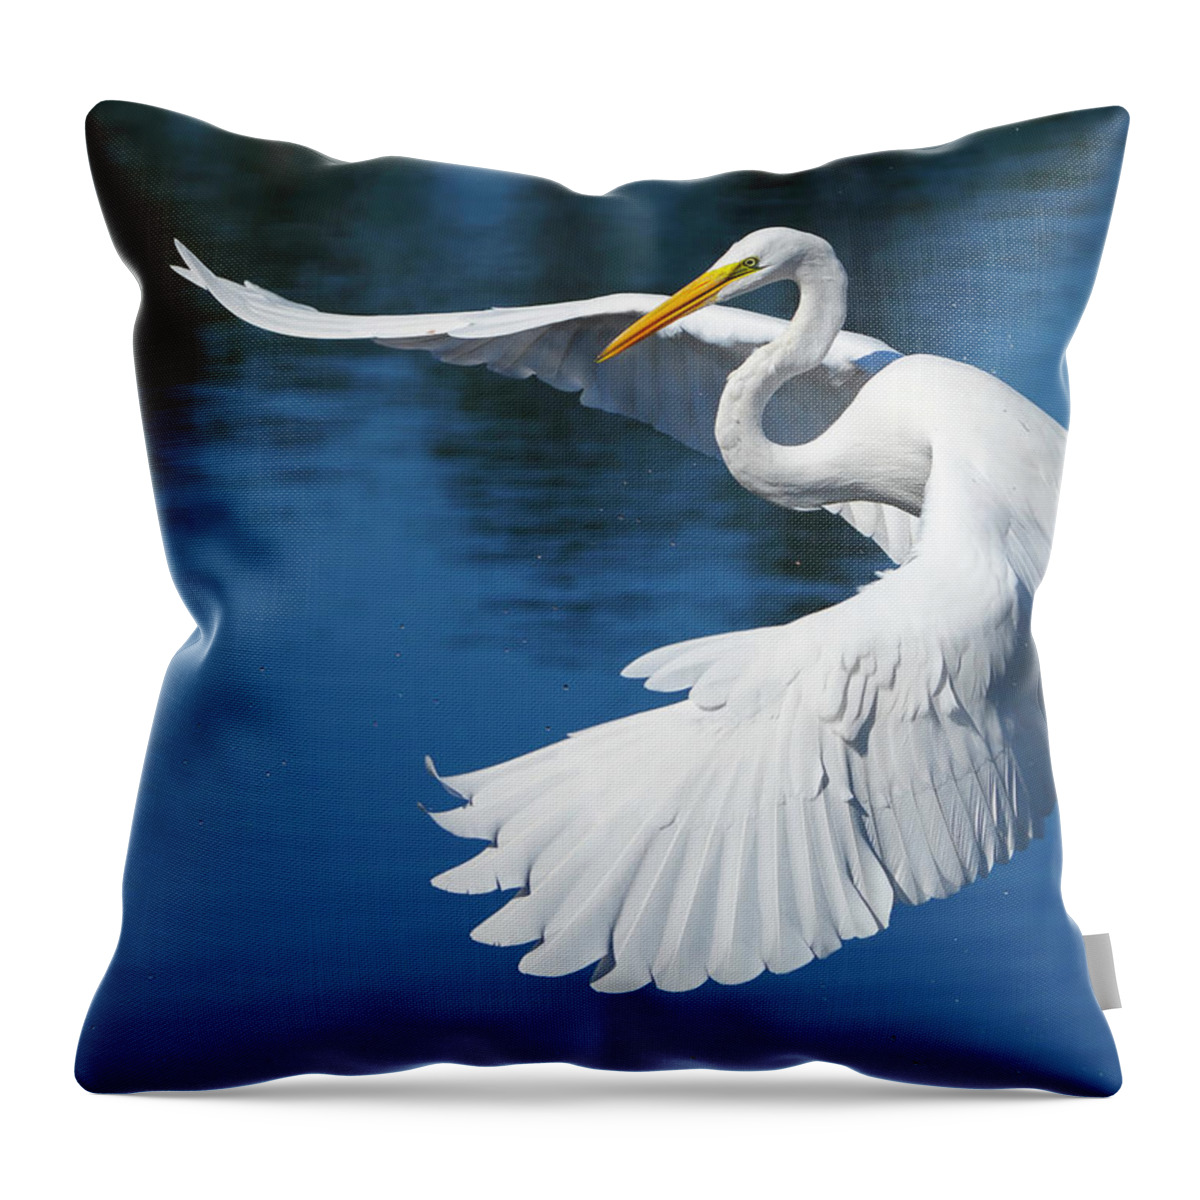 Birds Throw Pillow featuring the photograph Graceful Great Egret by Larry Marshall